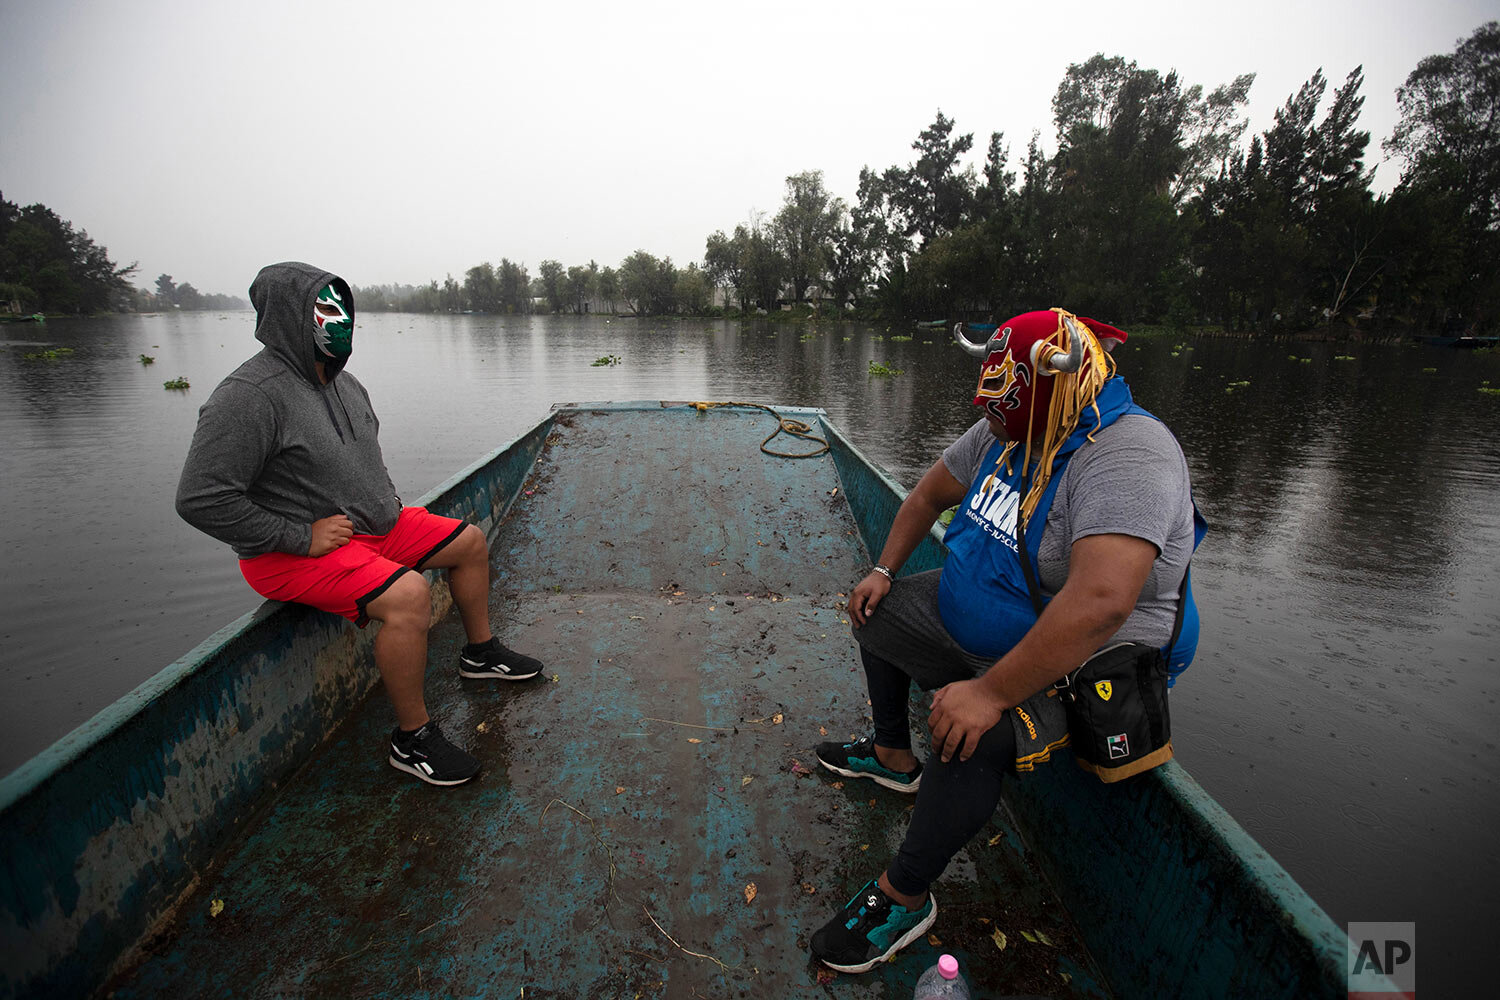  Lucha Libre brothers, "Ciclonico," or Cyclonic, left, and Mister Jerry, ride a boat to their training site on Xochimilco's famous floating gardens on the outskirts of Mexico City, early Aug. 20, 2020, amid COVID-19 that has closed wrestling halls. (